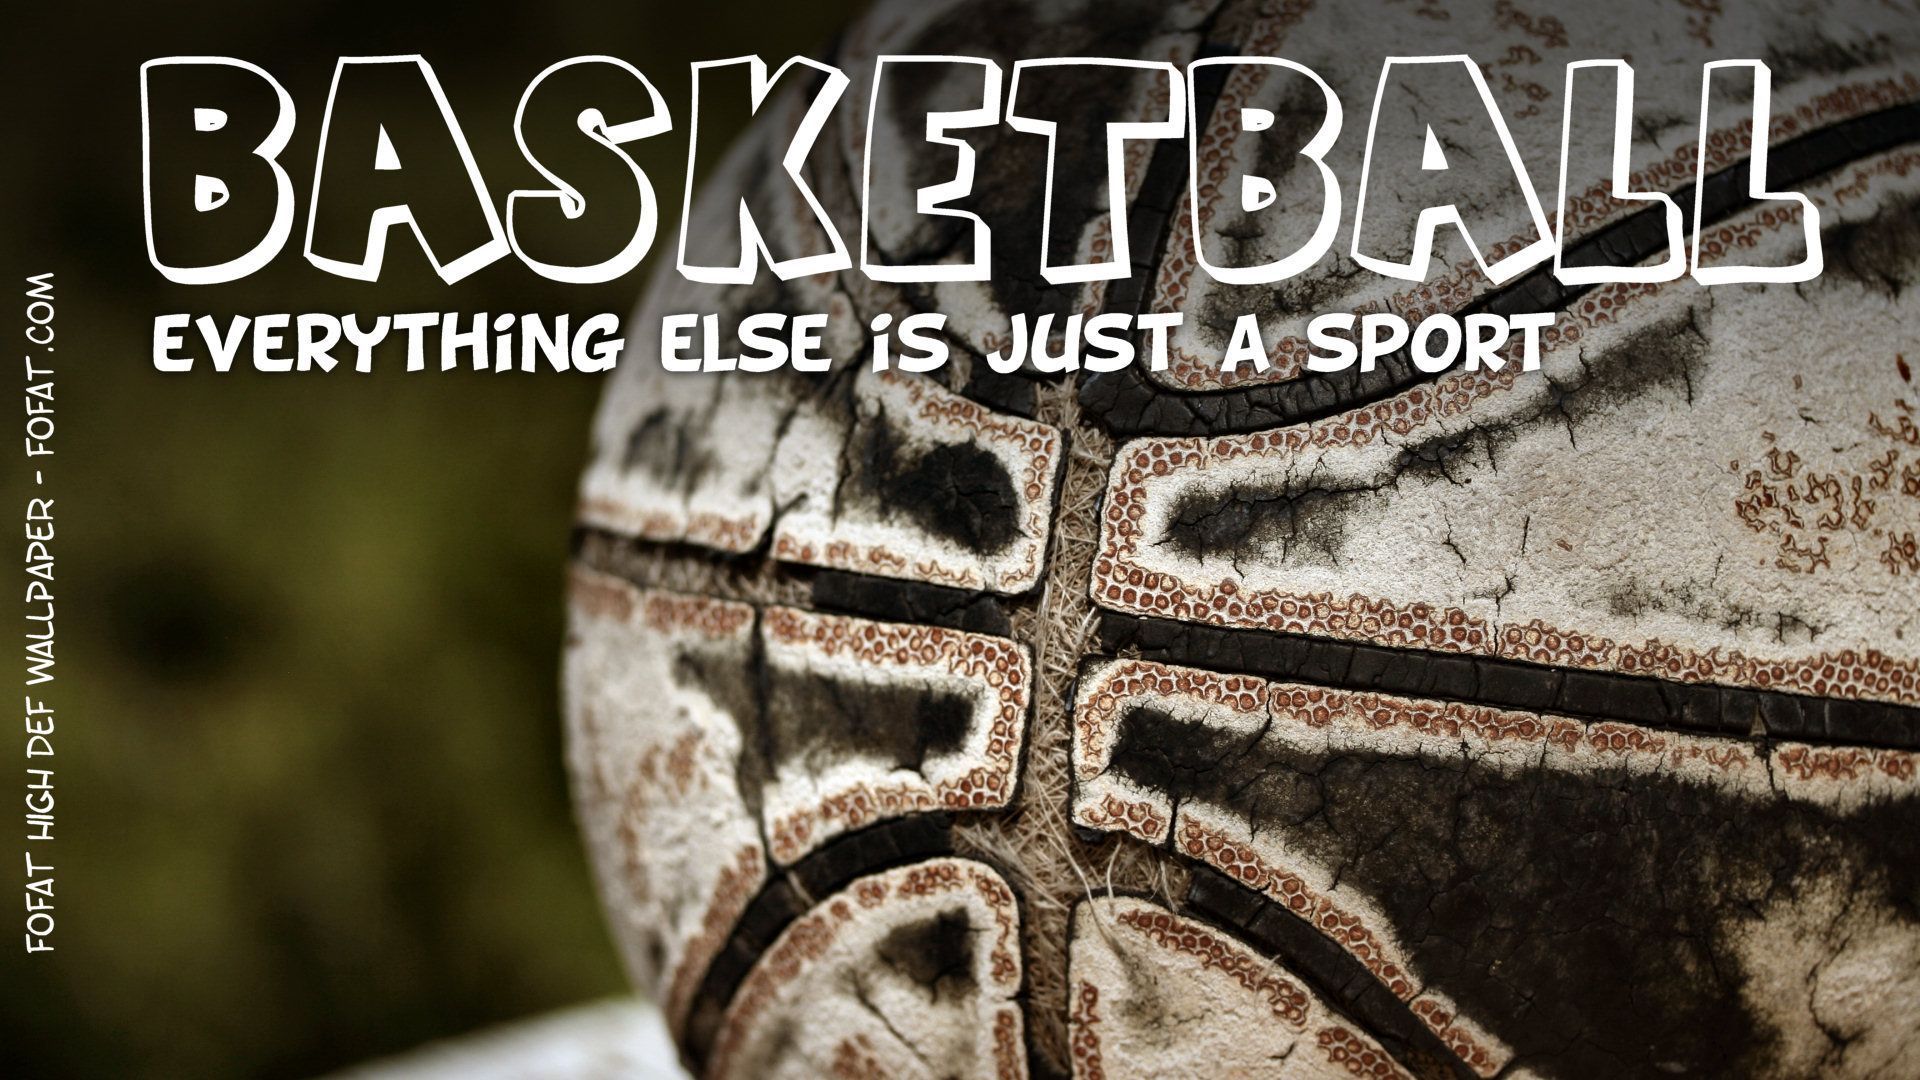 Mobile Basketball Pictures - Hd Wallpapers Of Basketball - 1920x1080  Wallpaper 